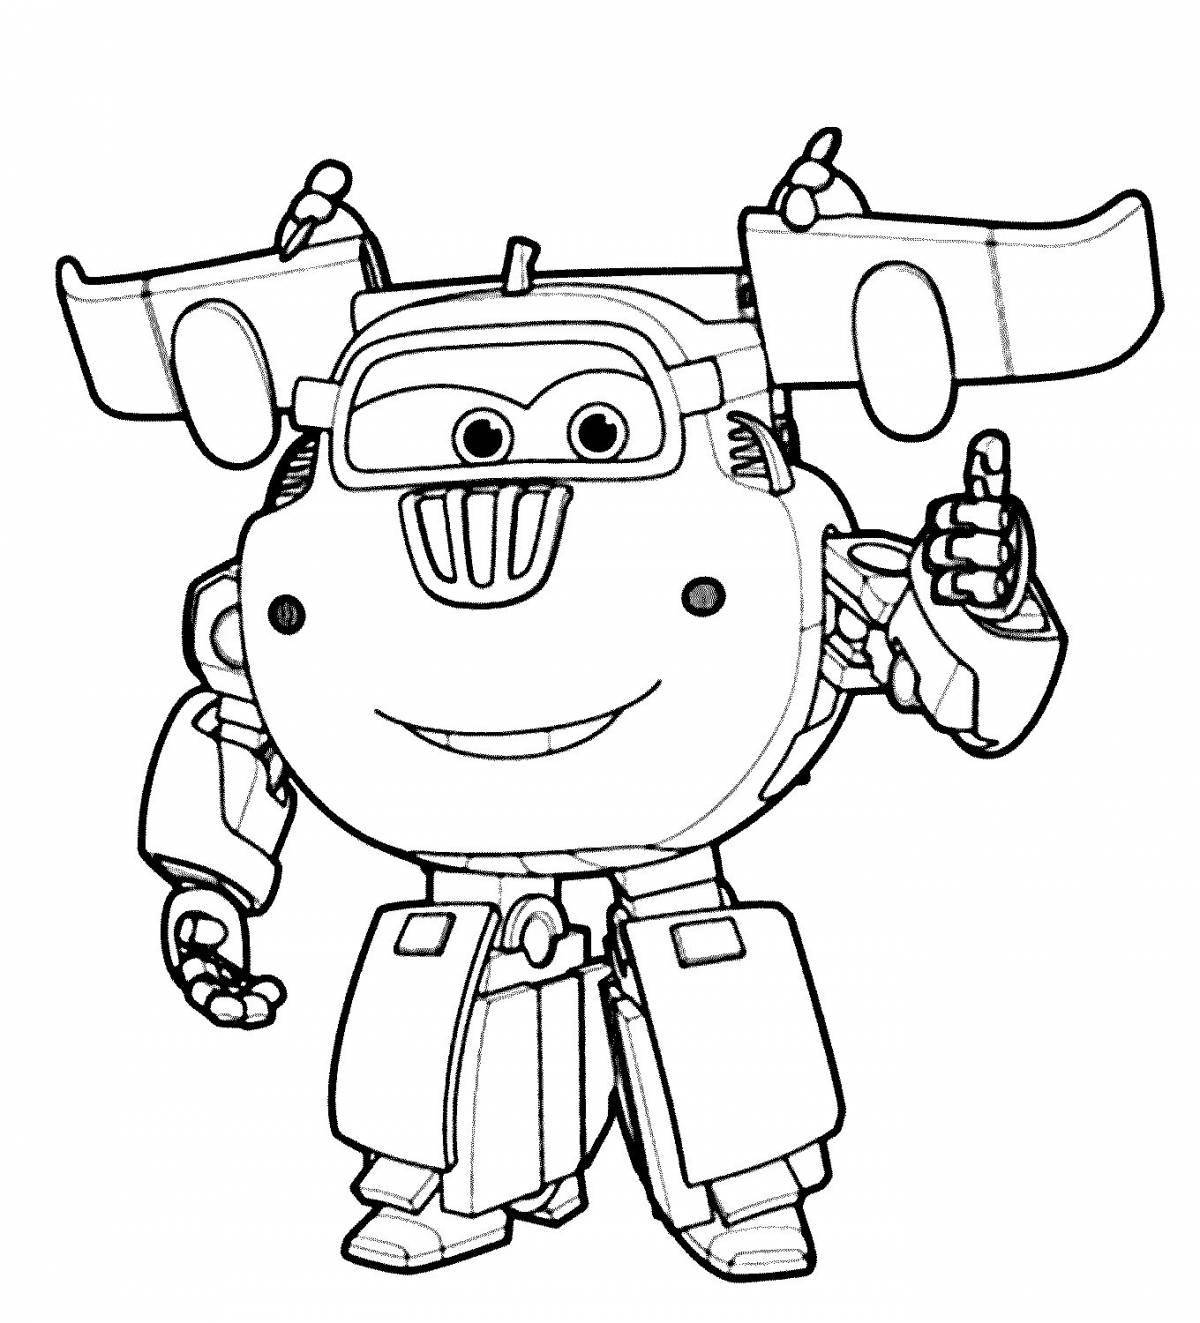 Lovely donny super wings coloring page